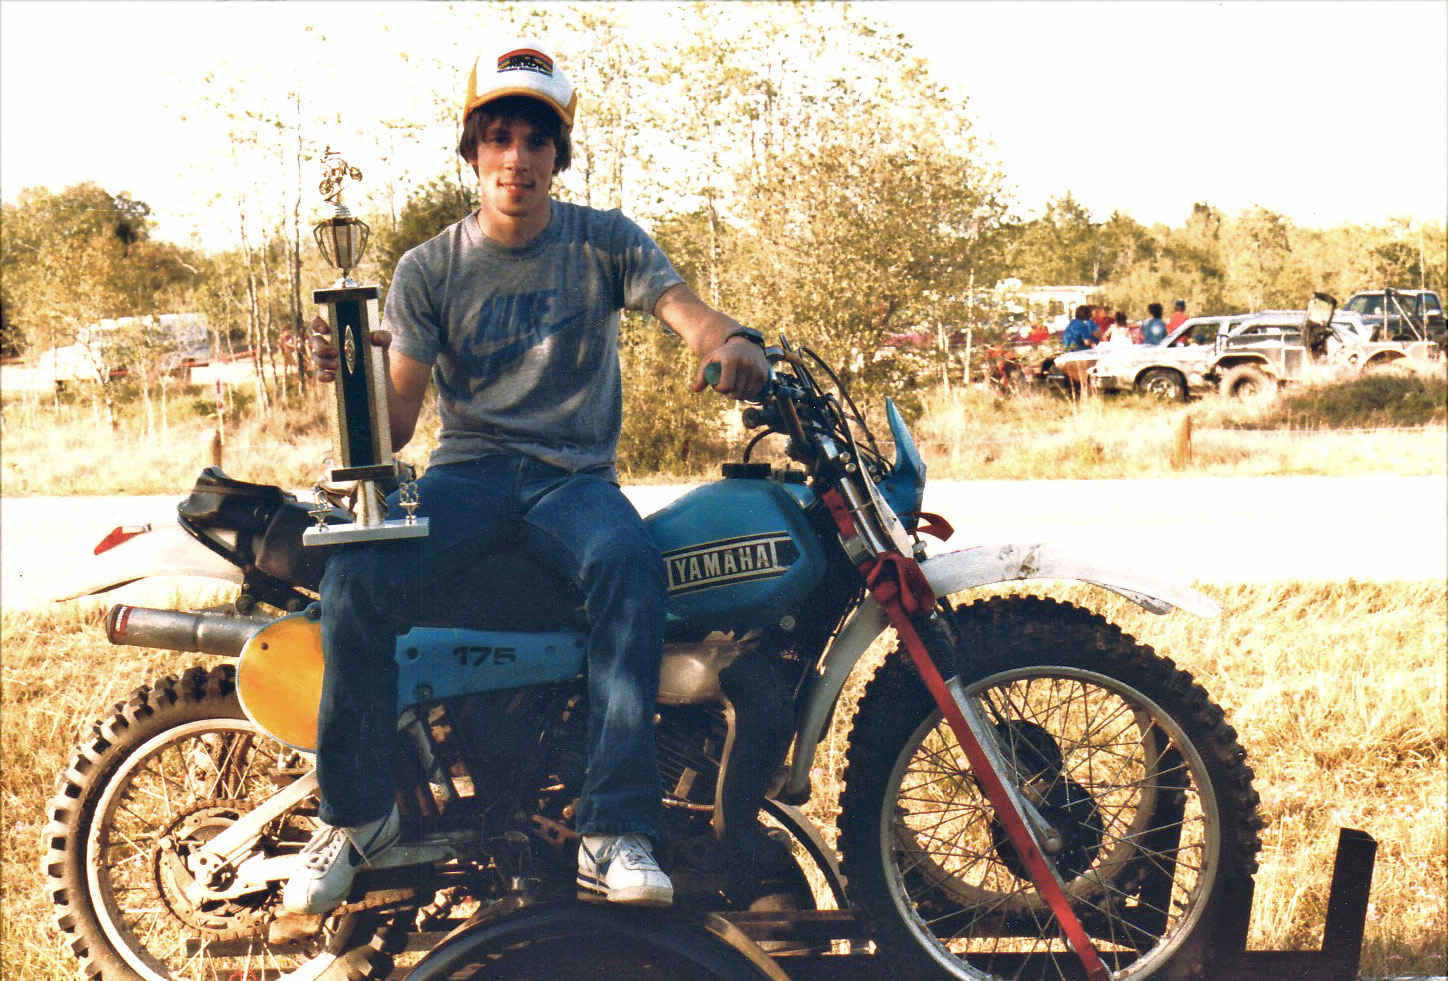 Raced an 82 IT175 3 hour hare scrambles in July 1983 in Austin, Texas. It doesn't look like it, but I was about dead after that race. The last hour was just hanging on and trying to not crash. My arms were like rubber. It was 101 degrees. View full size.